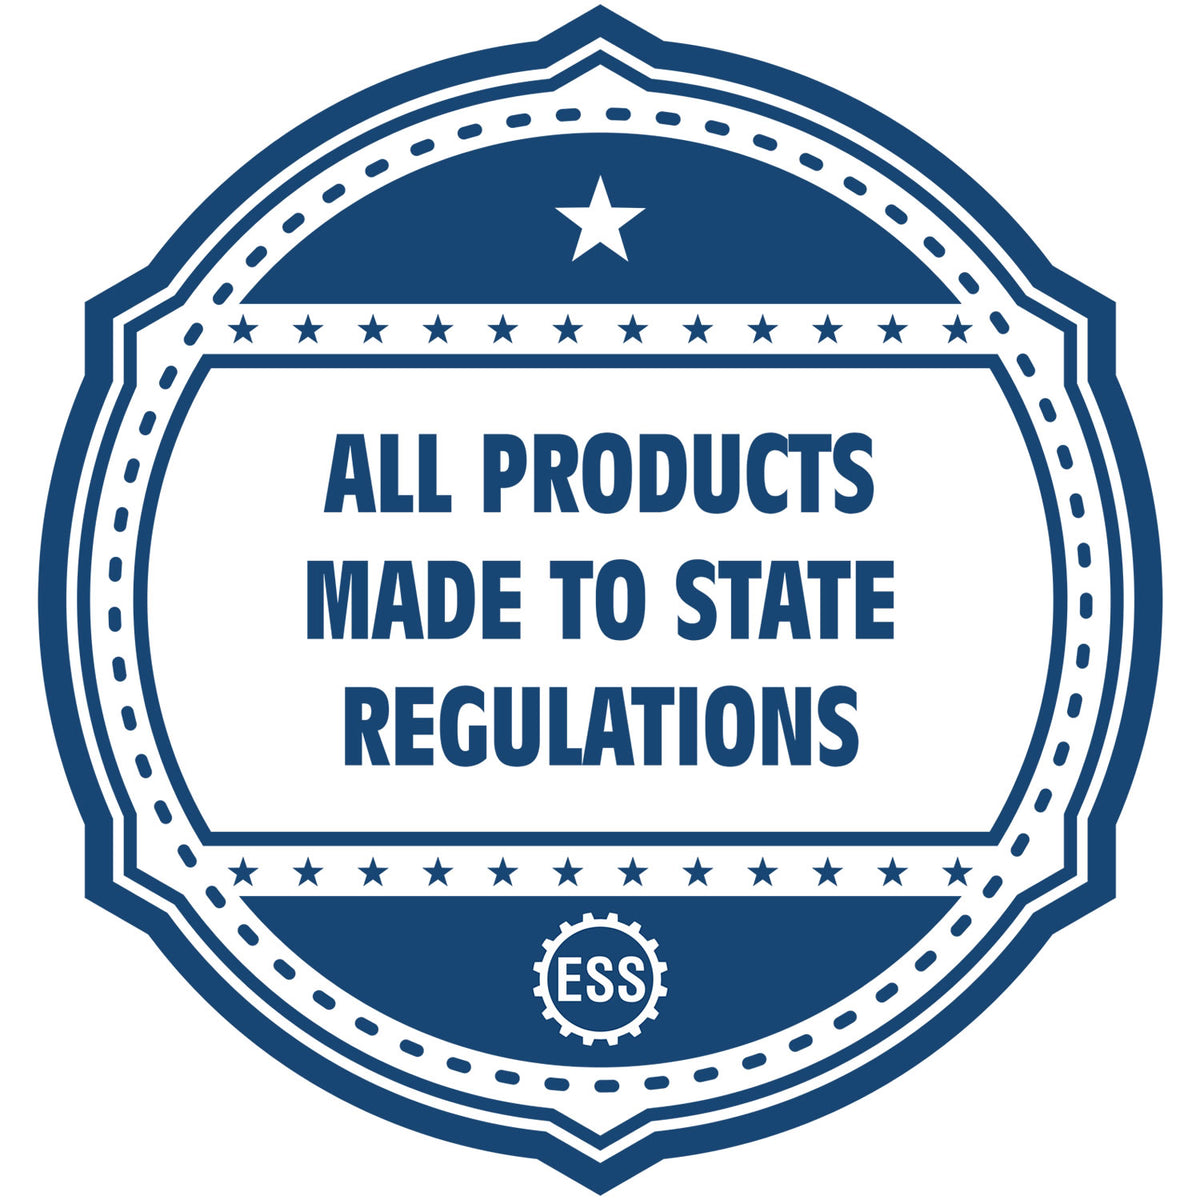 An icon or badge element for the Self-Inking Rhode Island Landscape Architect Stamp showing that this product is made in compliance with state regulations.